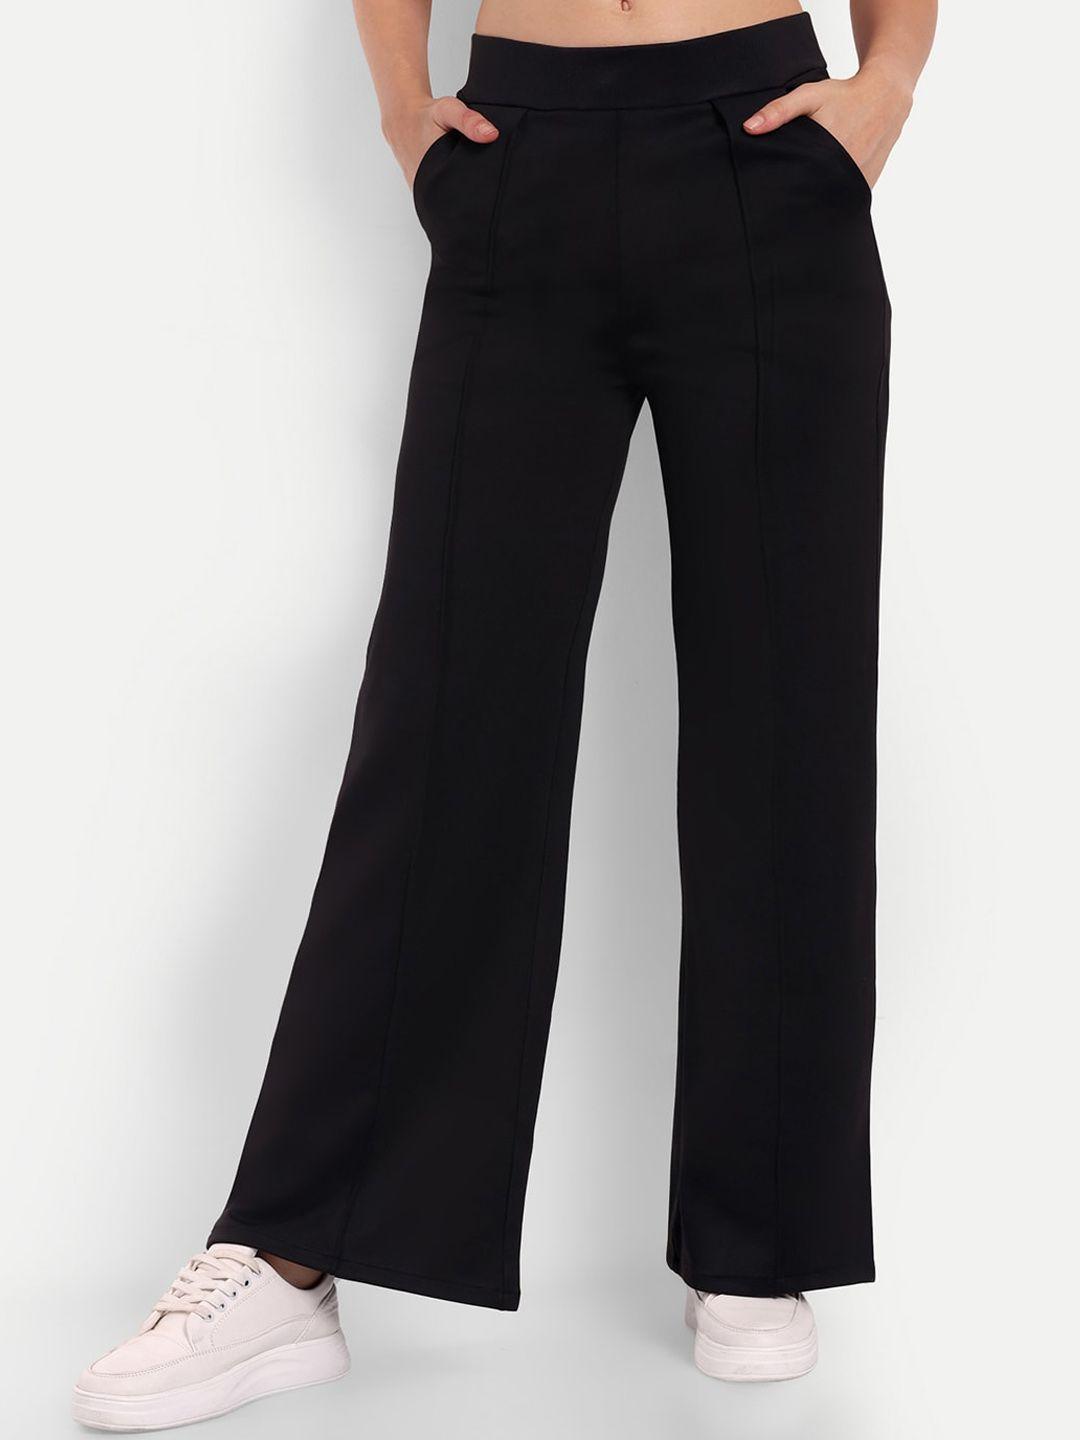 Next One Women Black Smart Straight Fit High-Rise Easy Wash Pleated Trousers